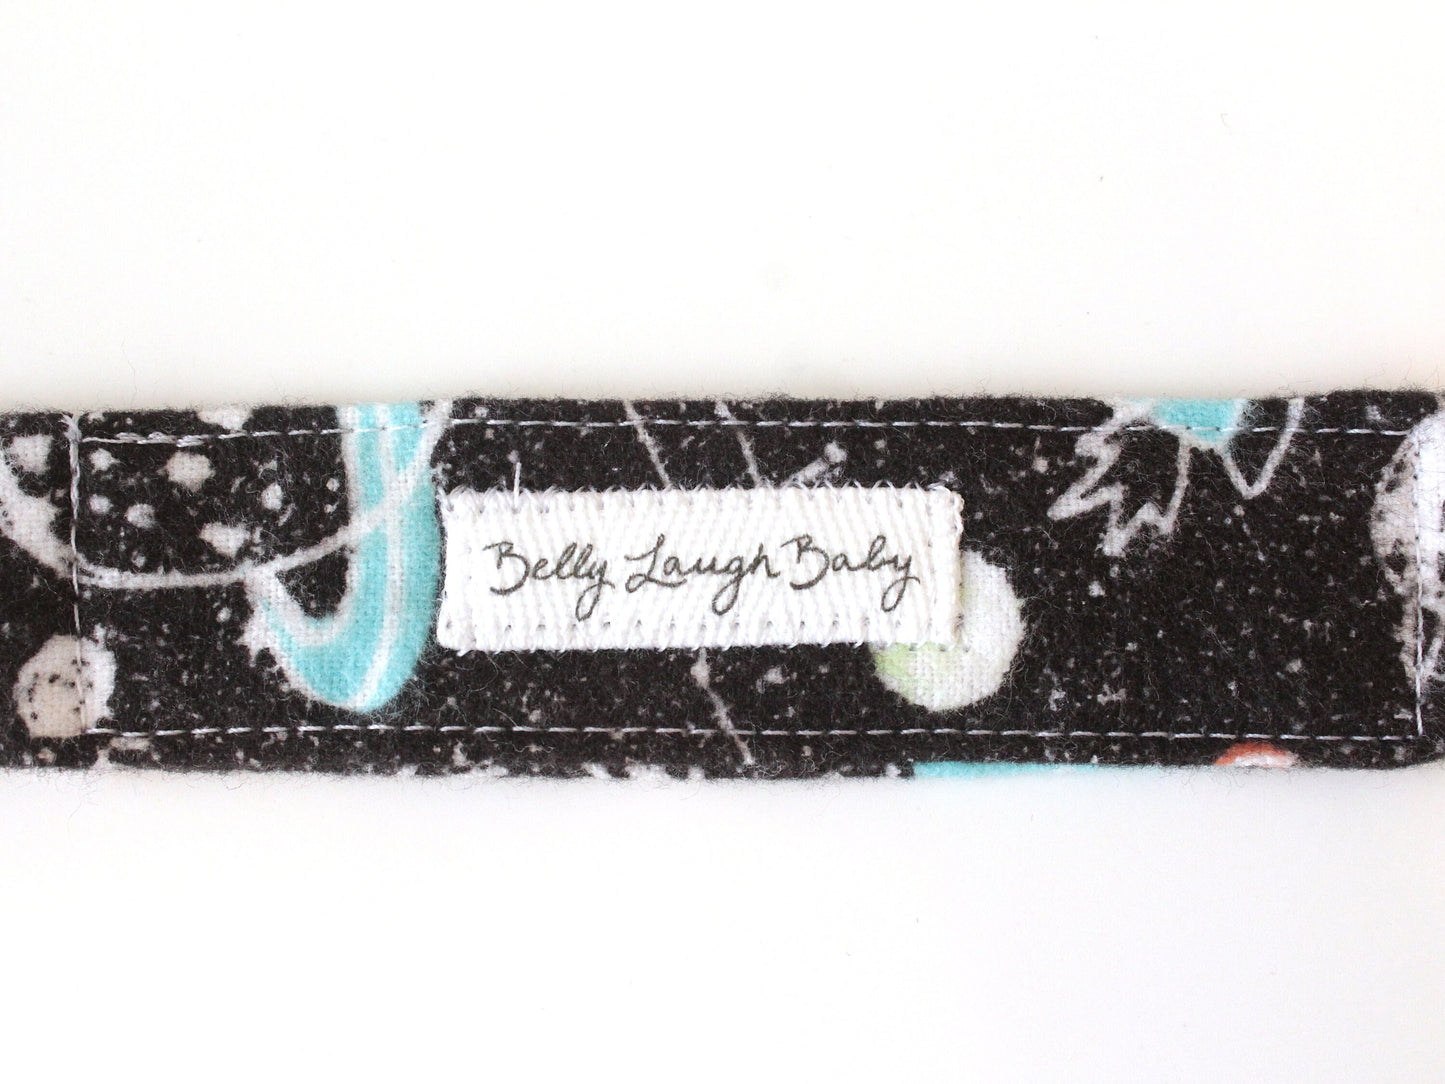 Space Galaxy Flannel Pacifier Clip Gender Neutral | Baby Gift | Soother Leash Binky Holder | CPSC Compliant